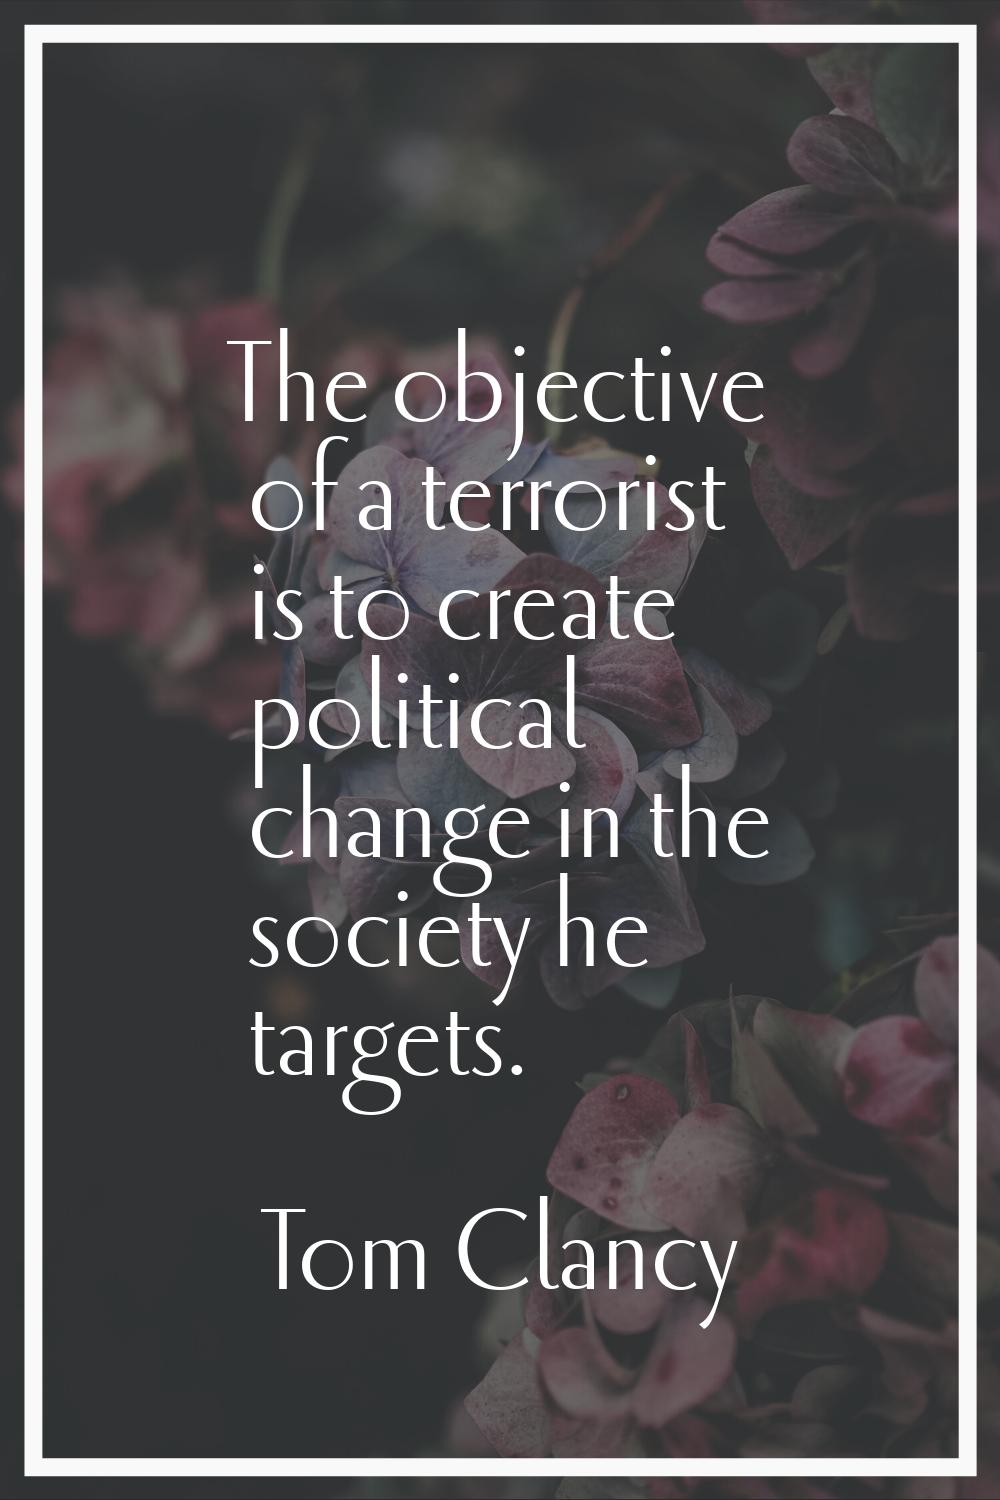 The objective of a terrorist is to create political change in the society he targets.